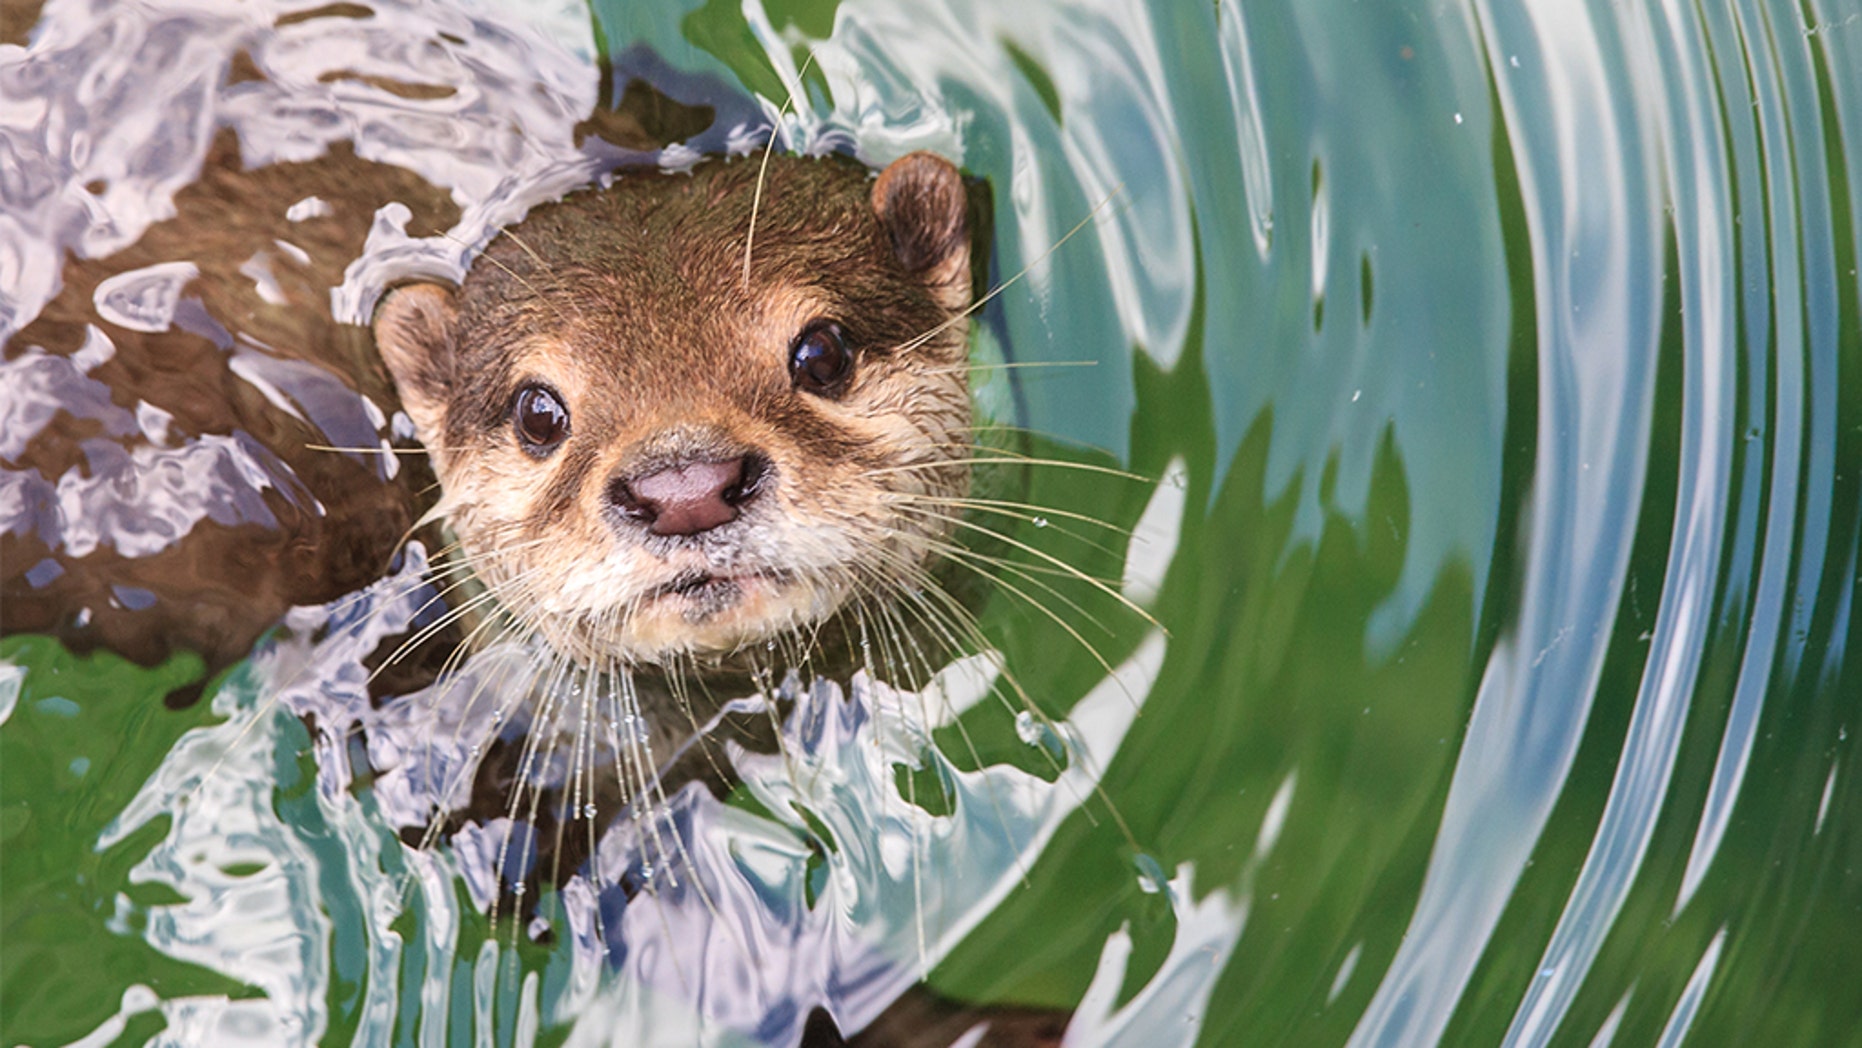 Florida woman attacked by ‘aggressive’ otter says 